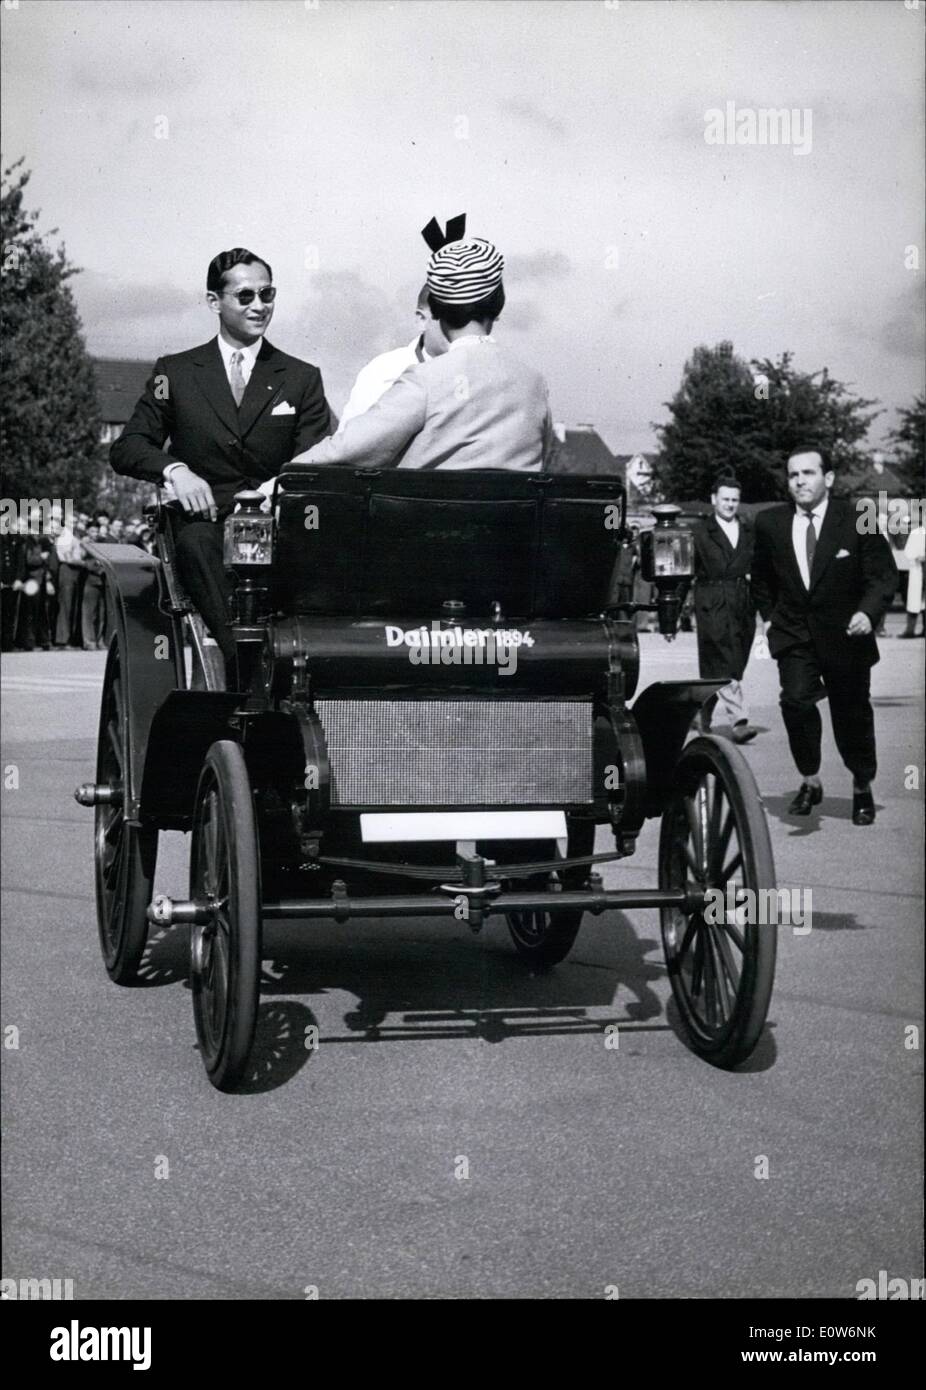 Aug. 08, 1961 - An unexpected speed; developed thee old fashioned Daimler Benz car of 1894 with the king and the queen of Thailand on board. Unexpected for the civil policeman who had the order too an eye on the security of queen Sirikit and king Bhumibol, when they visited the Mercedes-Benz factory museum Stuttgart during their visit in Germany. The policeman had to give ''full speed'' to his feet to fulfill his duty. Stock Photo